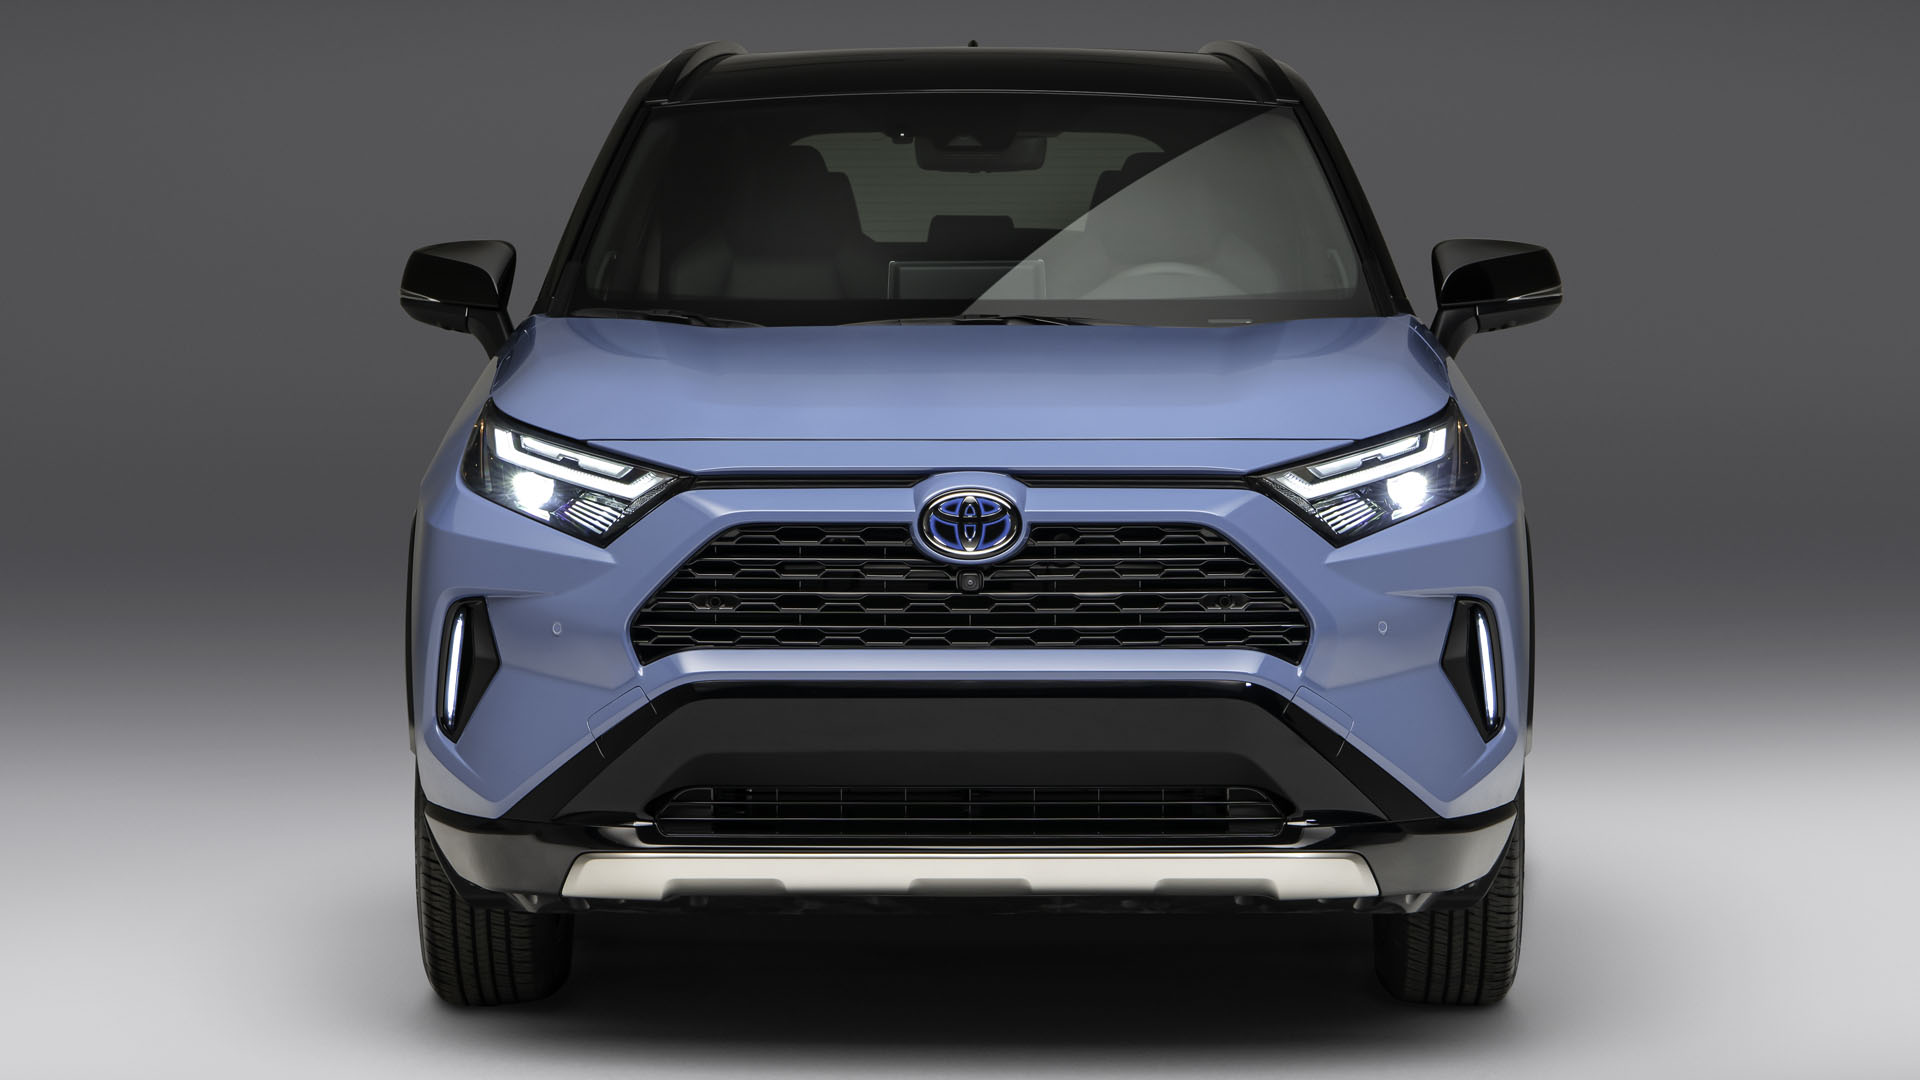 Toyota RAV4 Was The World’s Best-Selling Car in 2022: Study